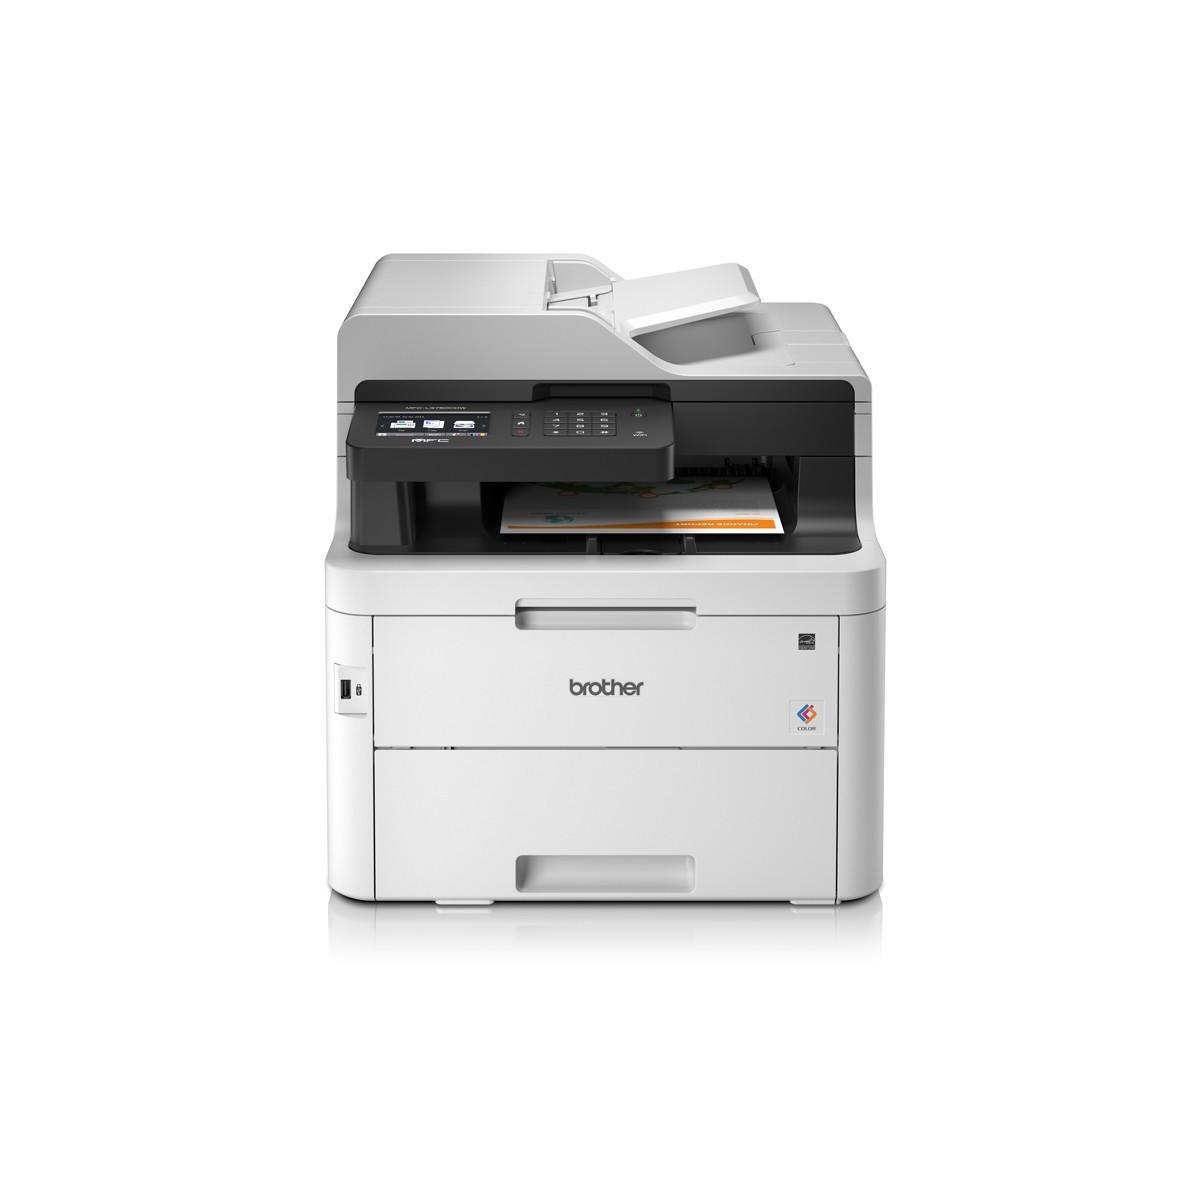 Brother MFC-L3750CDW A4 Colour Laser MFP